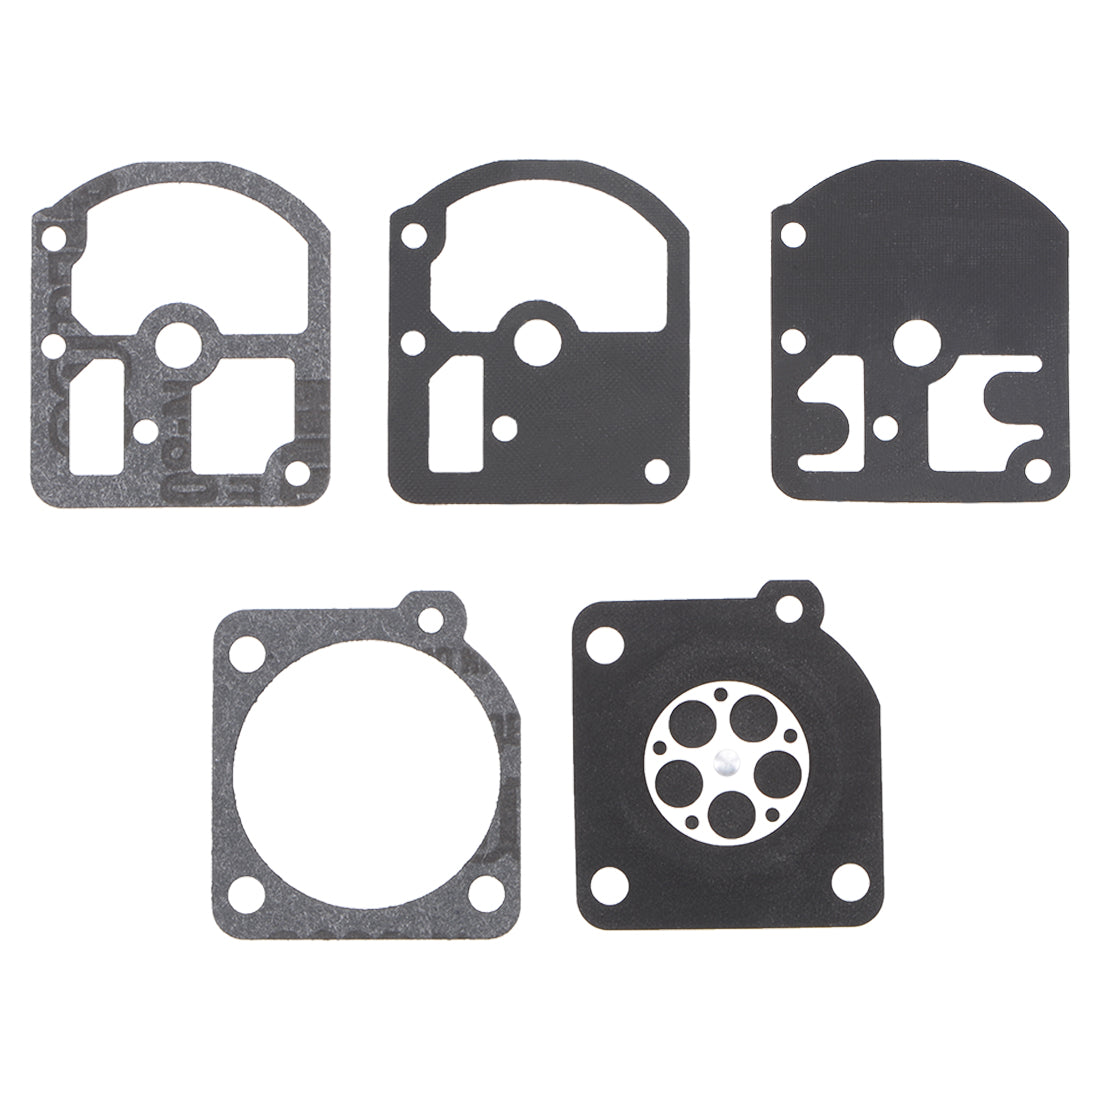 uxcell Uxcell RB-3uretor Rebuild Kit Gasket Diaphragm for RB-3 330 Series Chainsaw Engines